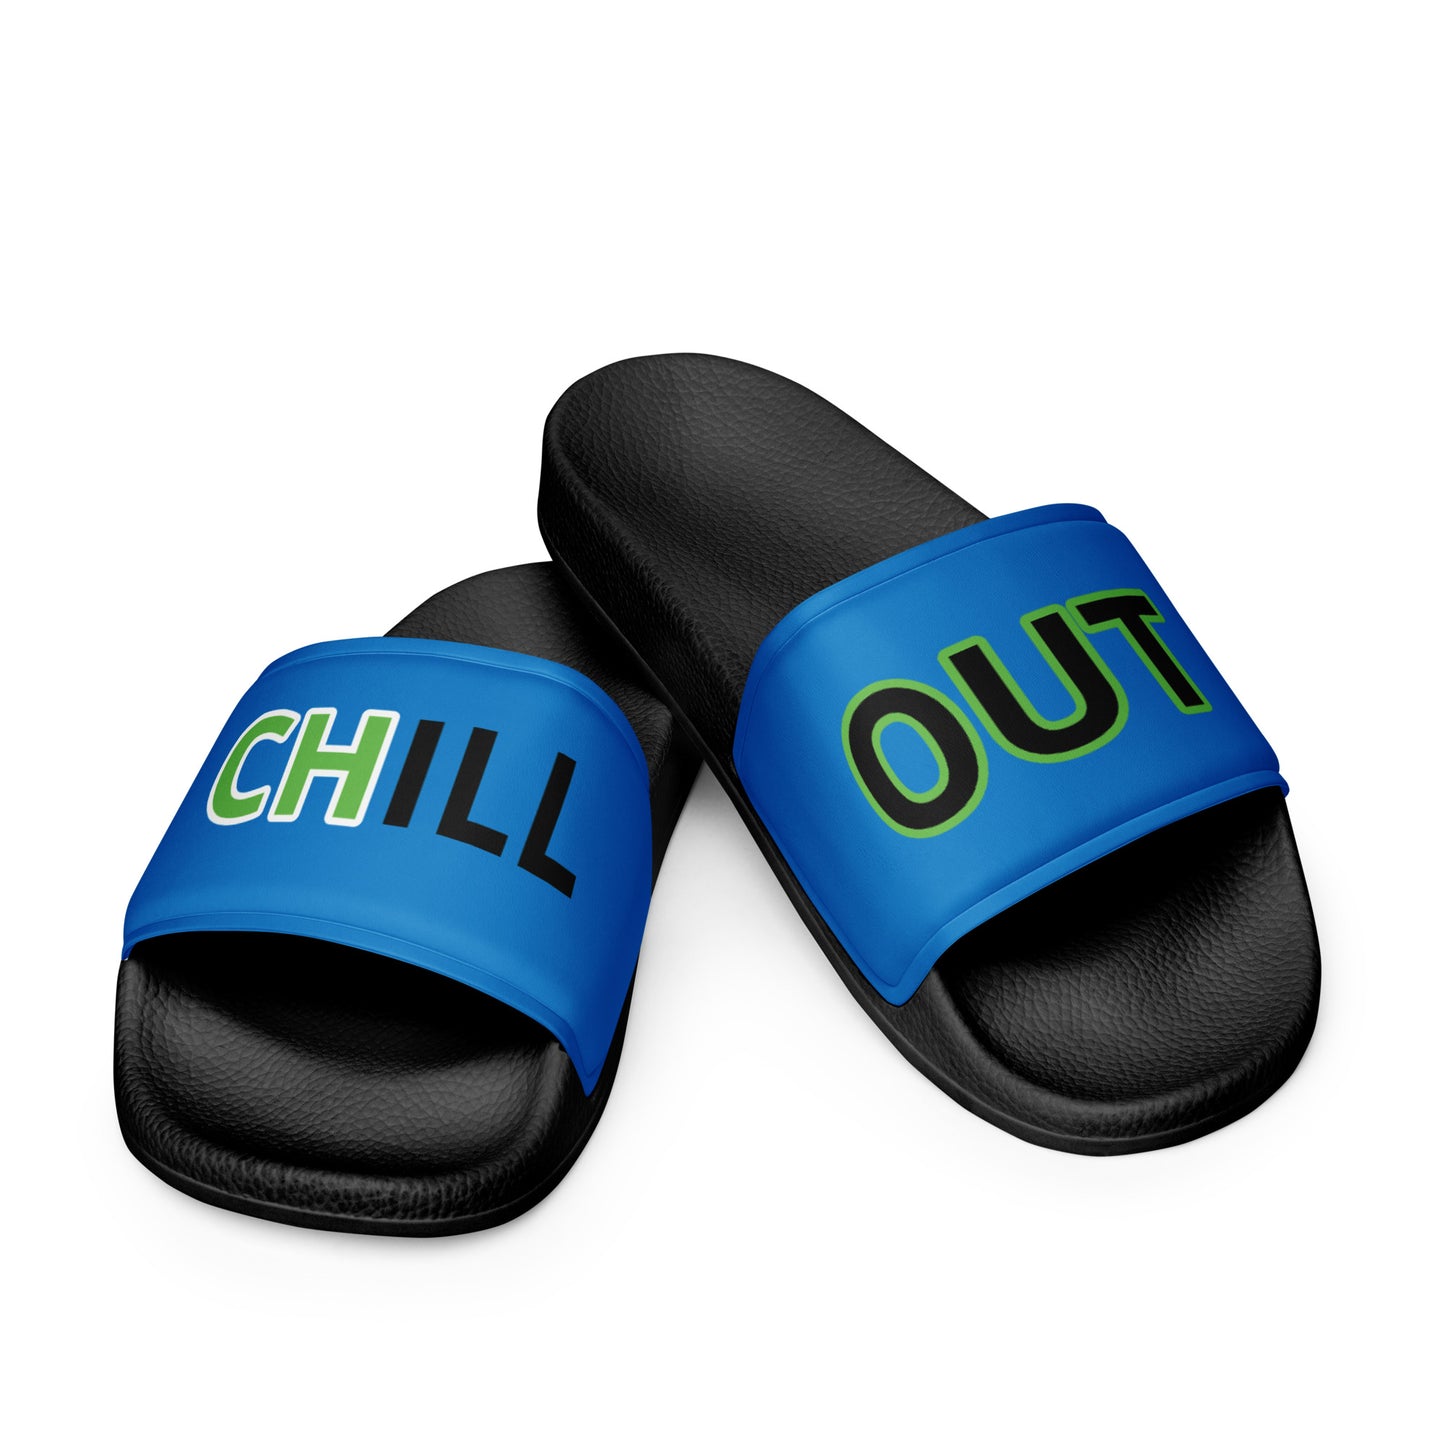 Chill out slides